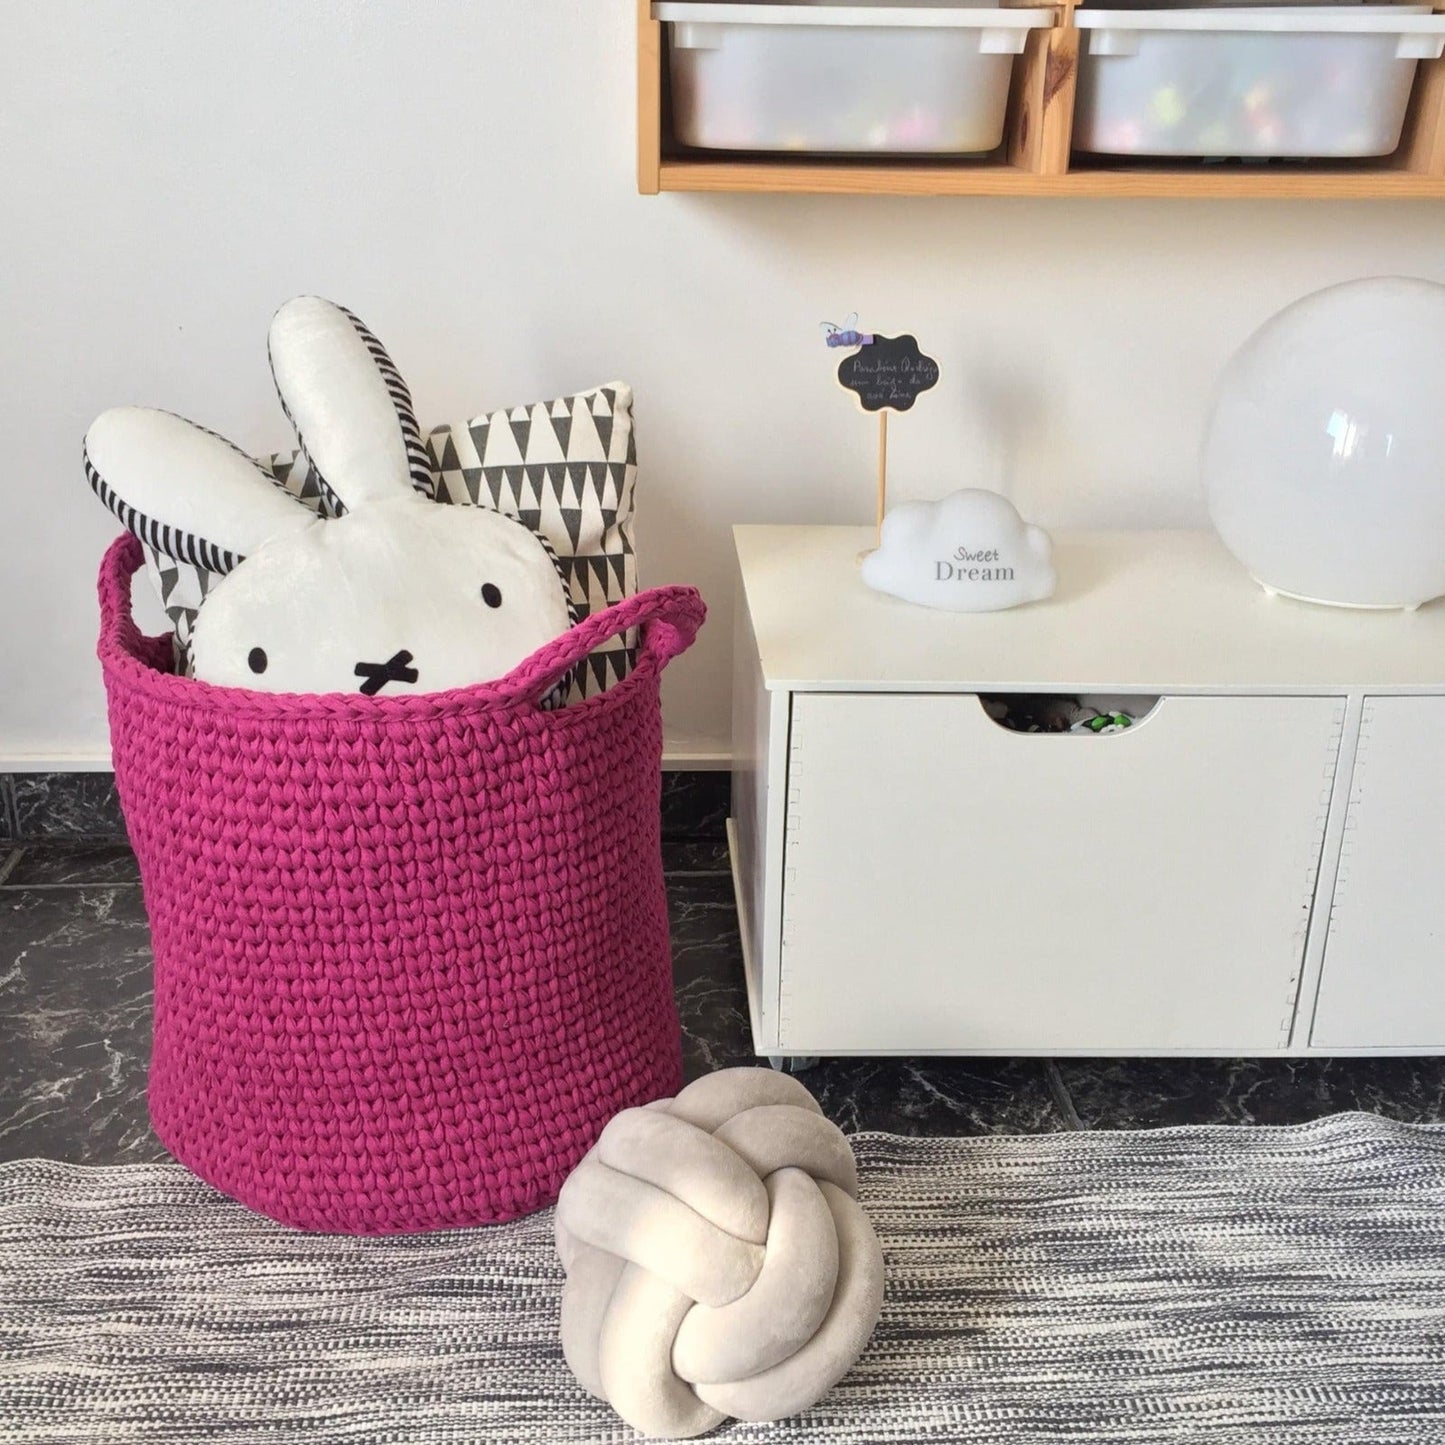 Storage Baskets for Toys, Blankets, Pillows and More - Looping Home